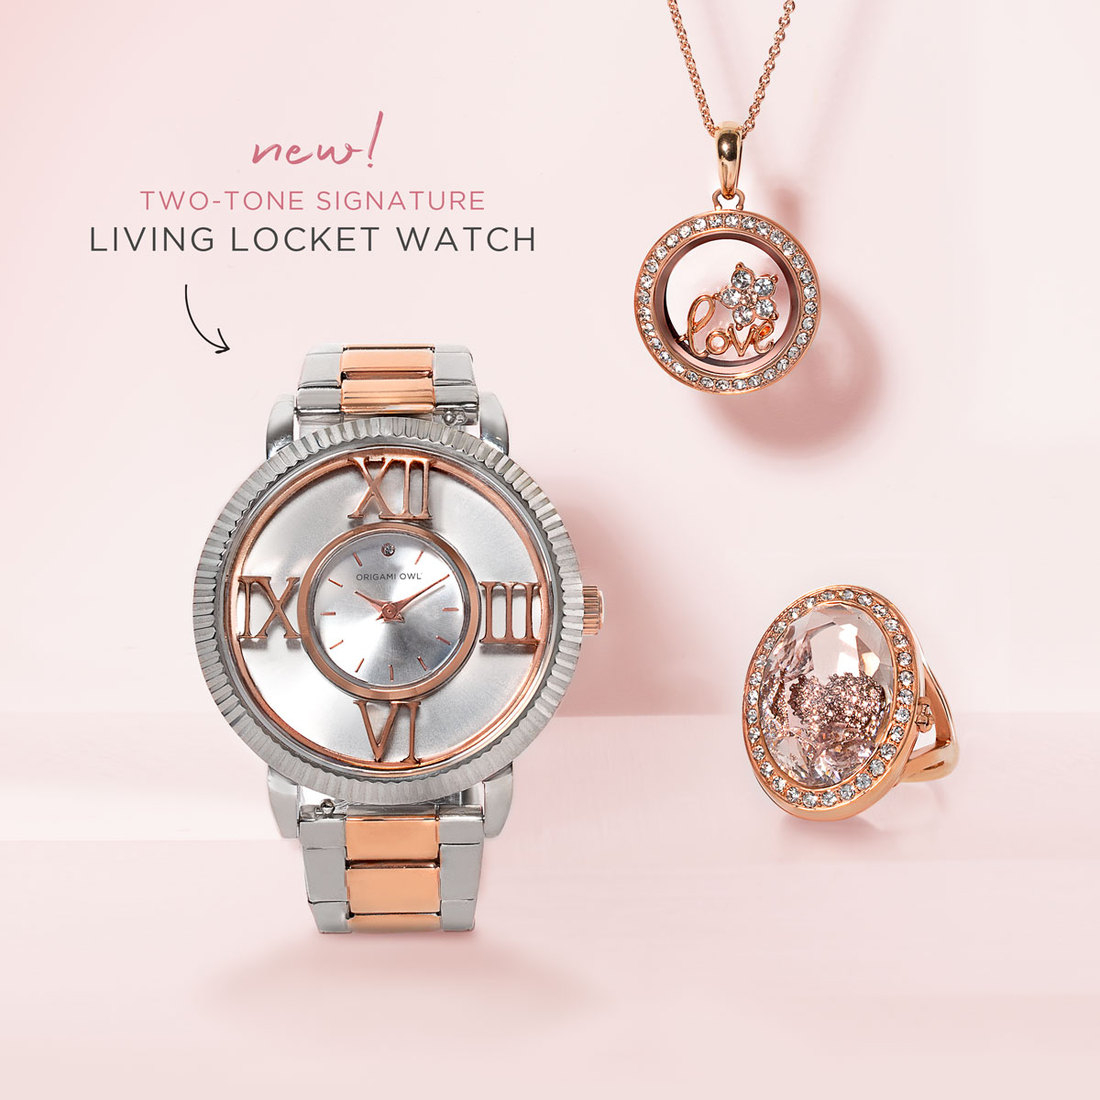 Origami Owl Tracking The Origami Owl Custom Jewelry Spring 2019 Collection Direct Sales